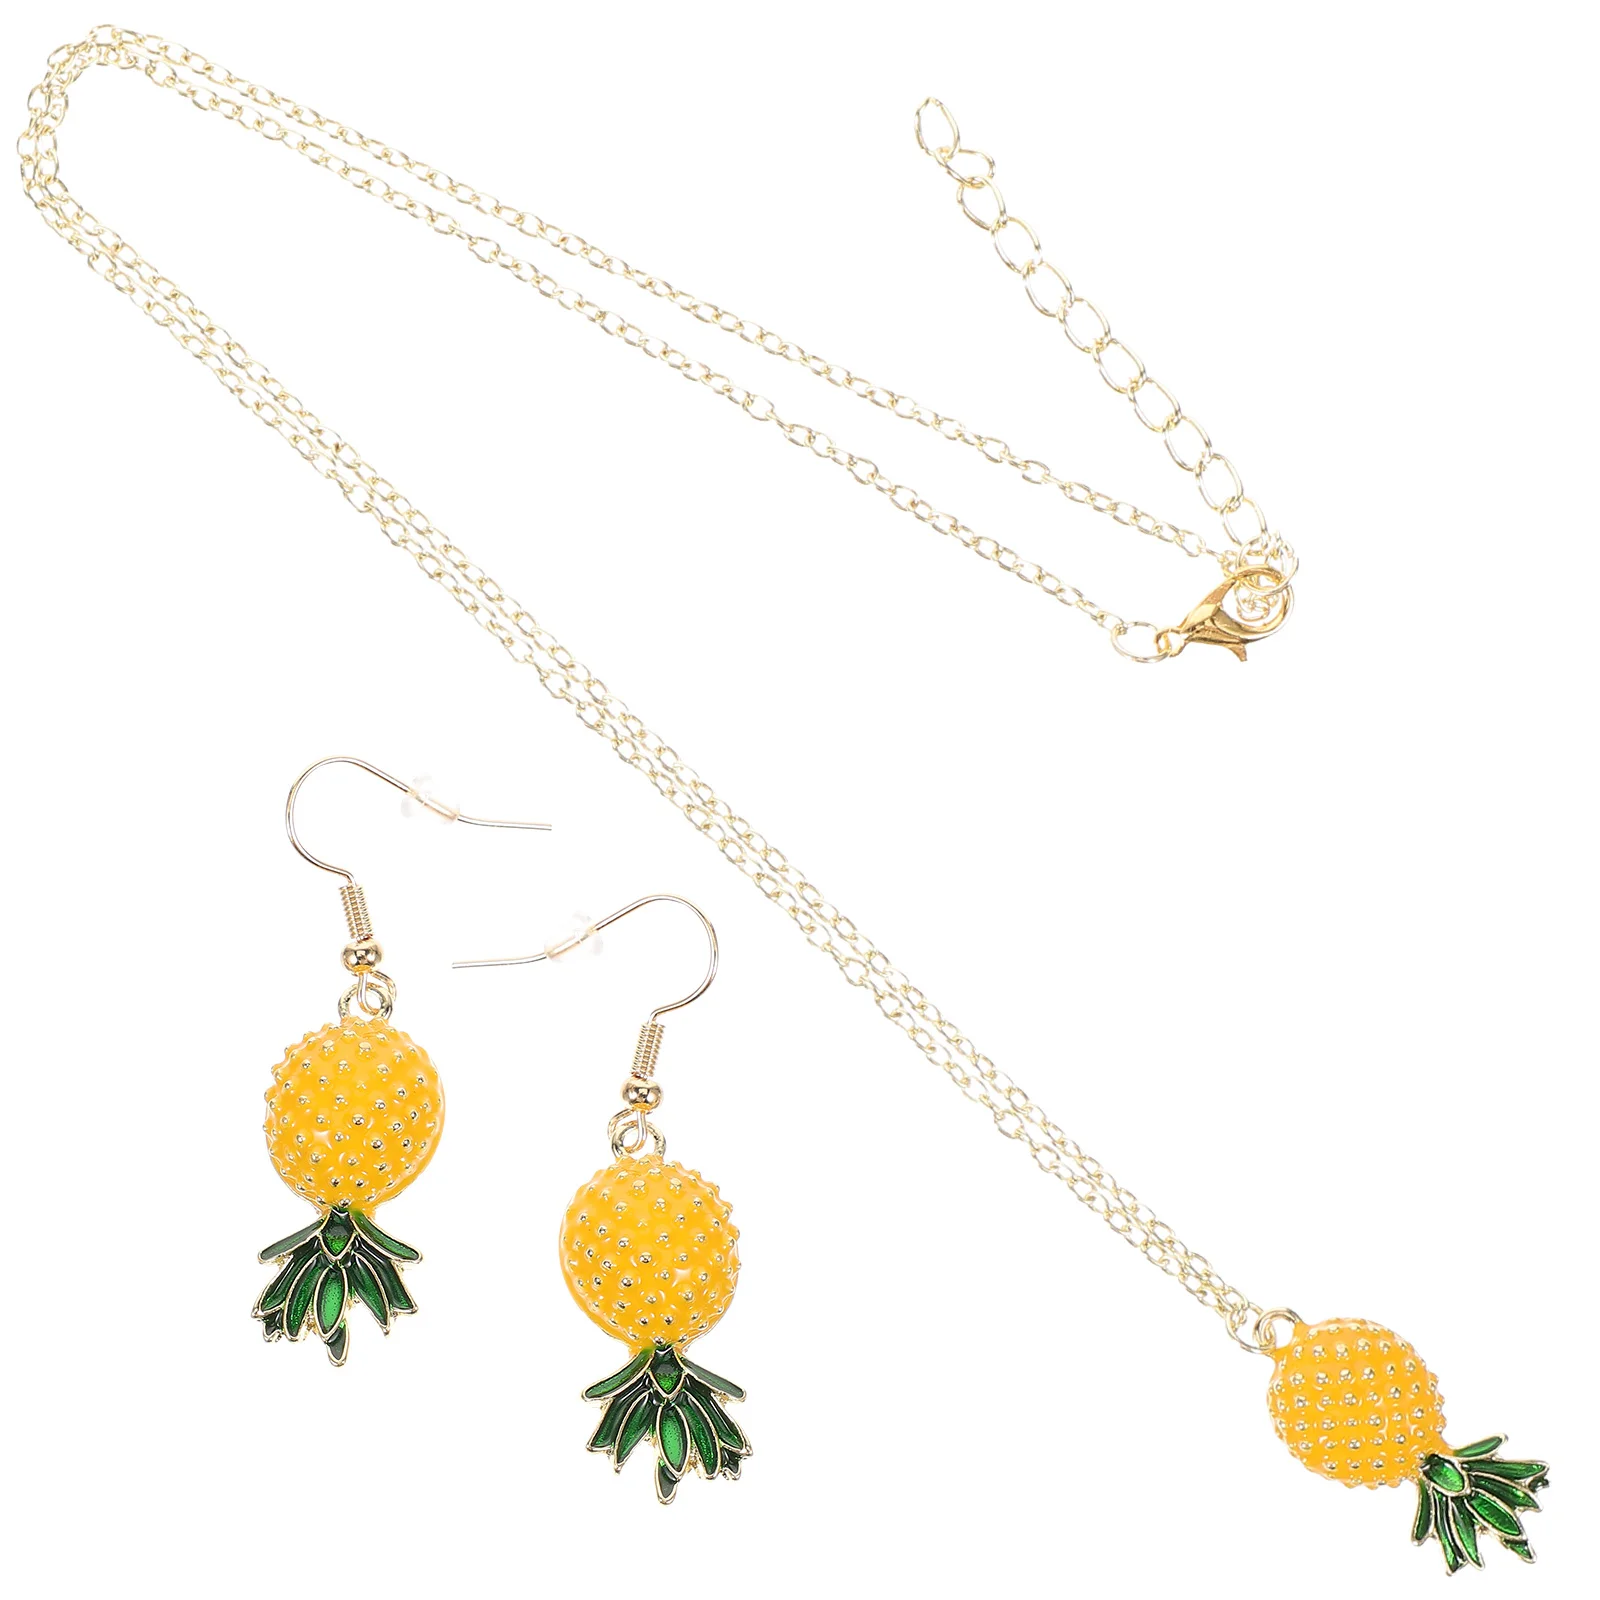 Pineapple Earring Necklace Earings for Womens Jewellery Earrings Ladies Small and Fresh